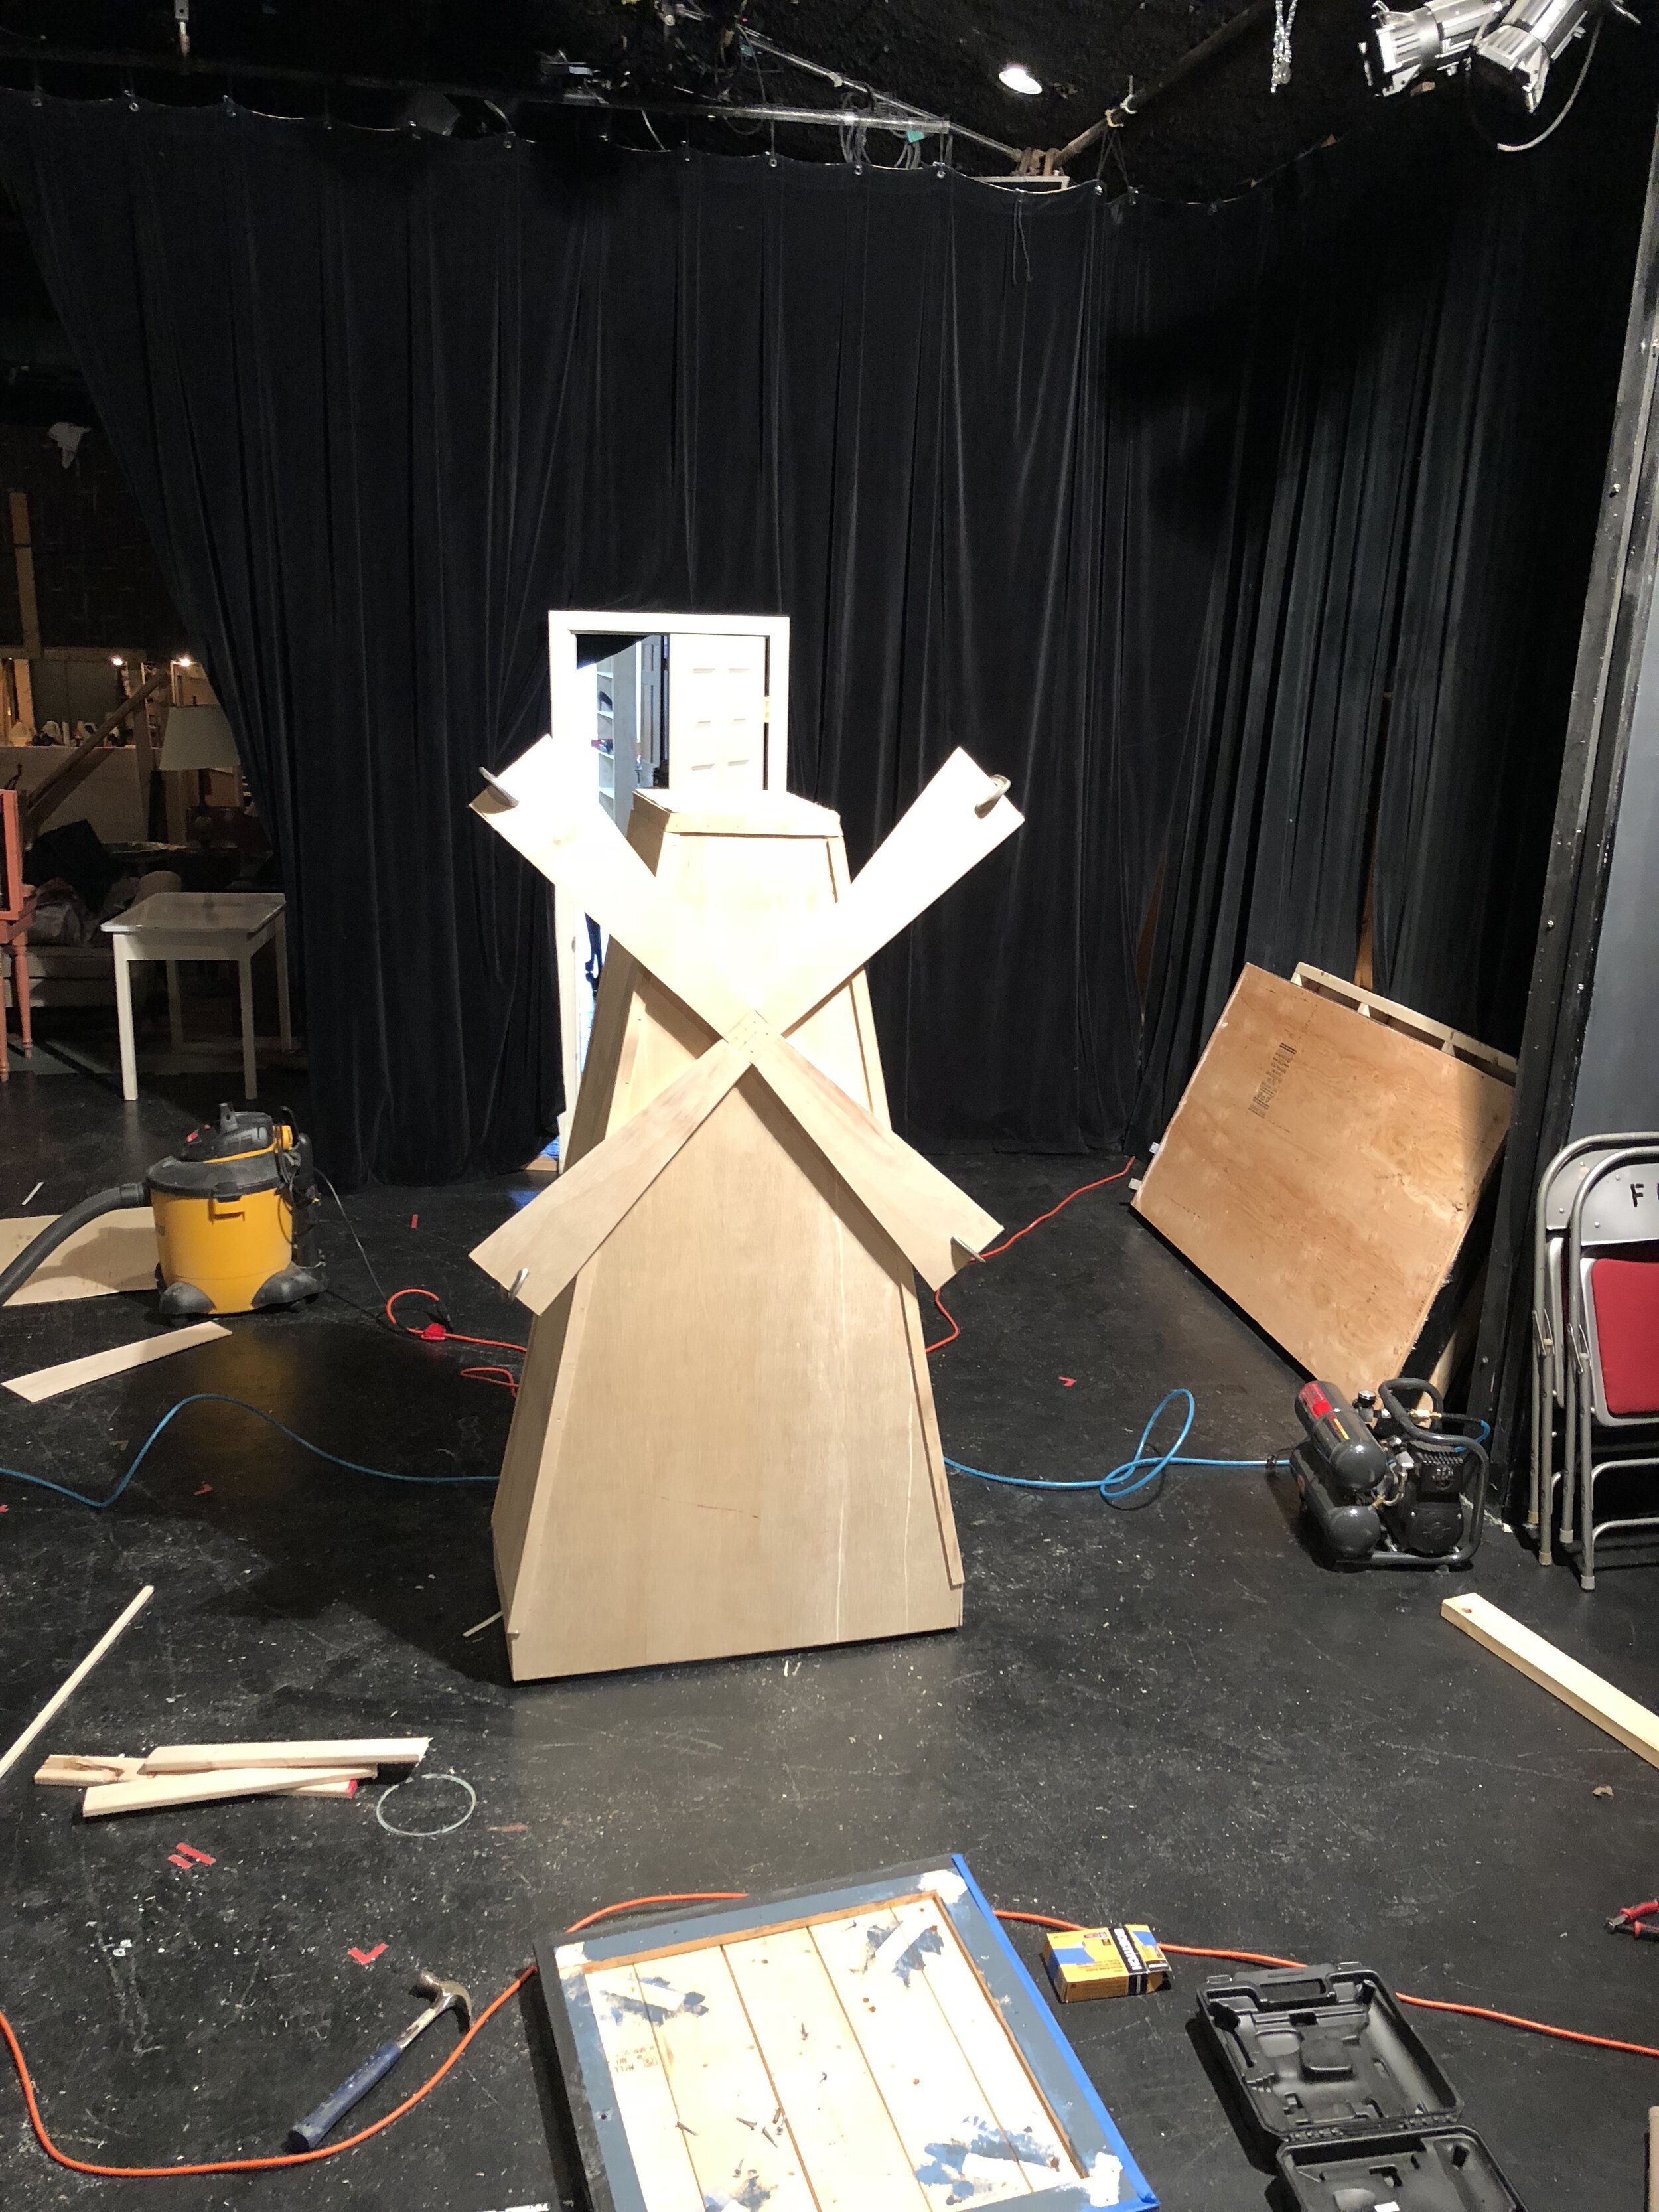  Progress Photo of Windmill.  Laugh Lines: One Act Comedies.  Theatre Workshop of Nantucket 2018. [Production Designer] 